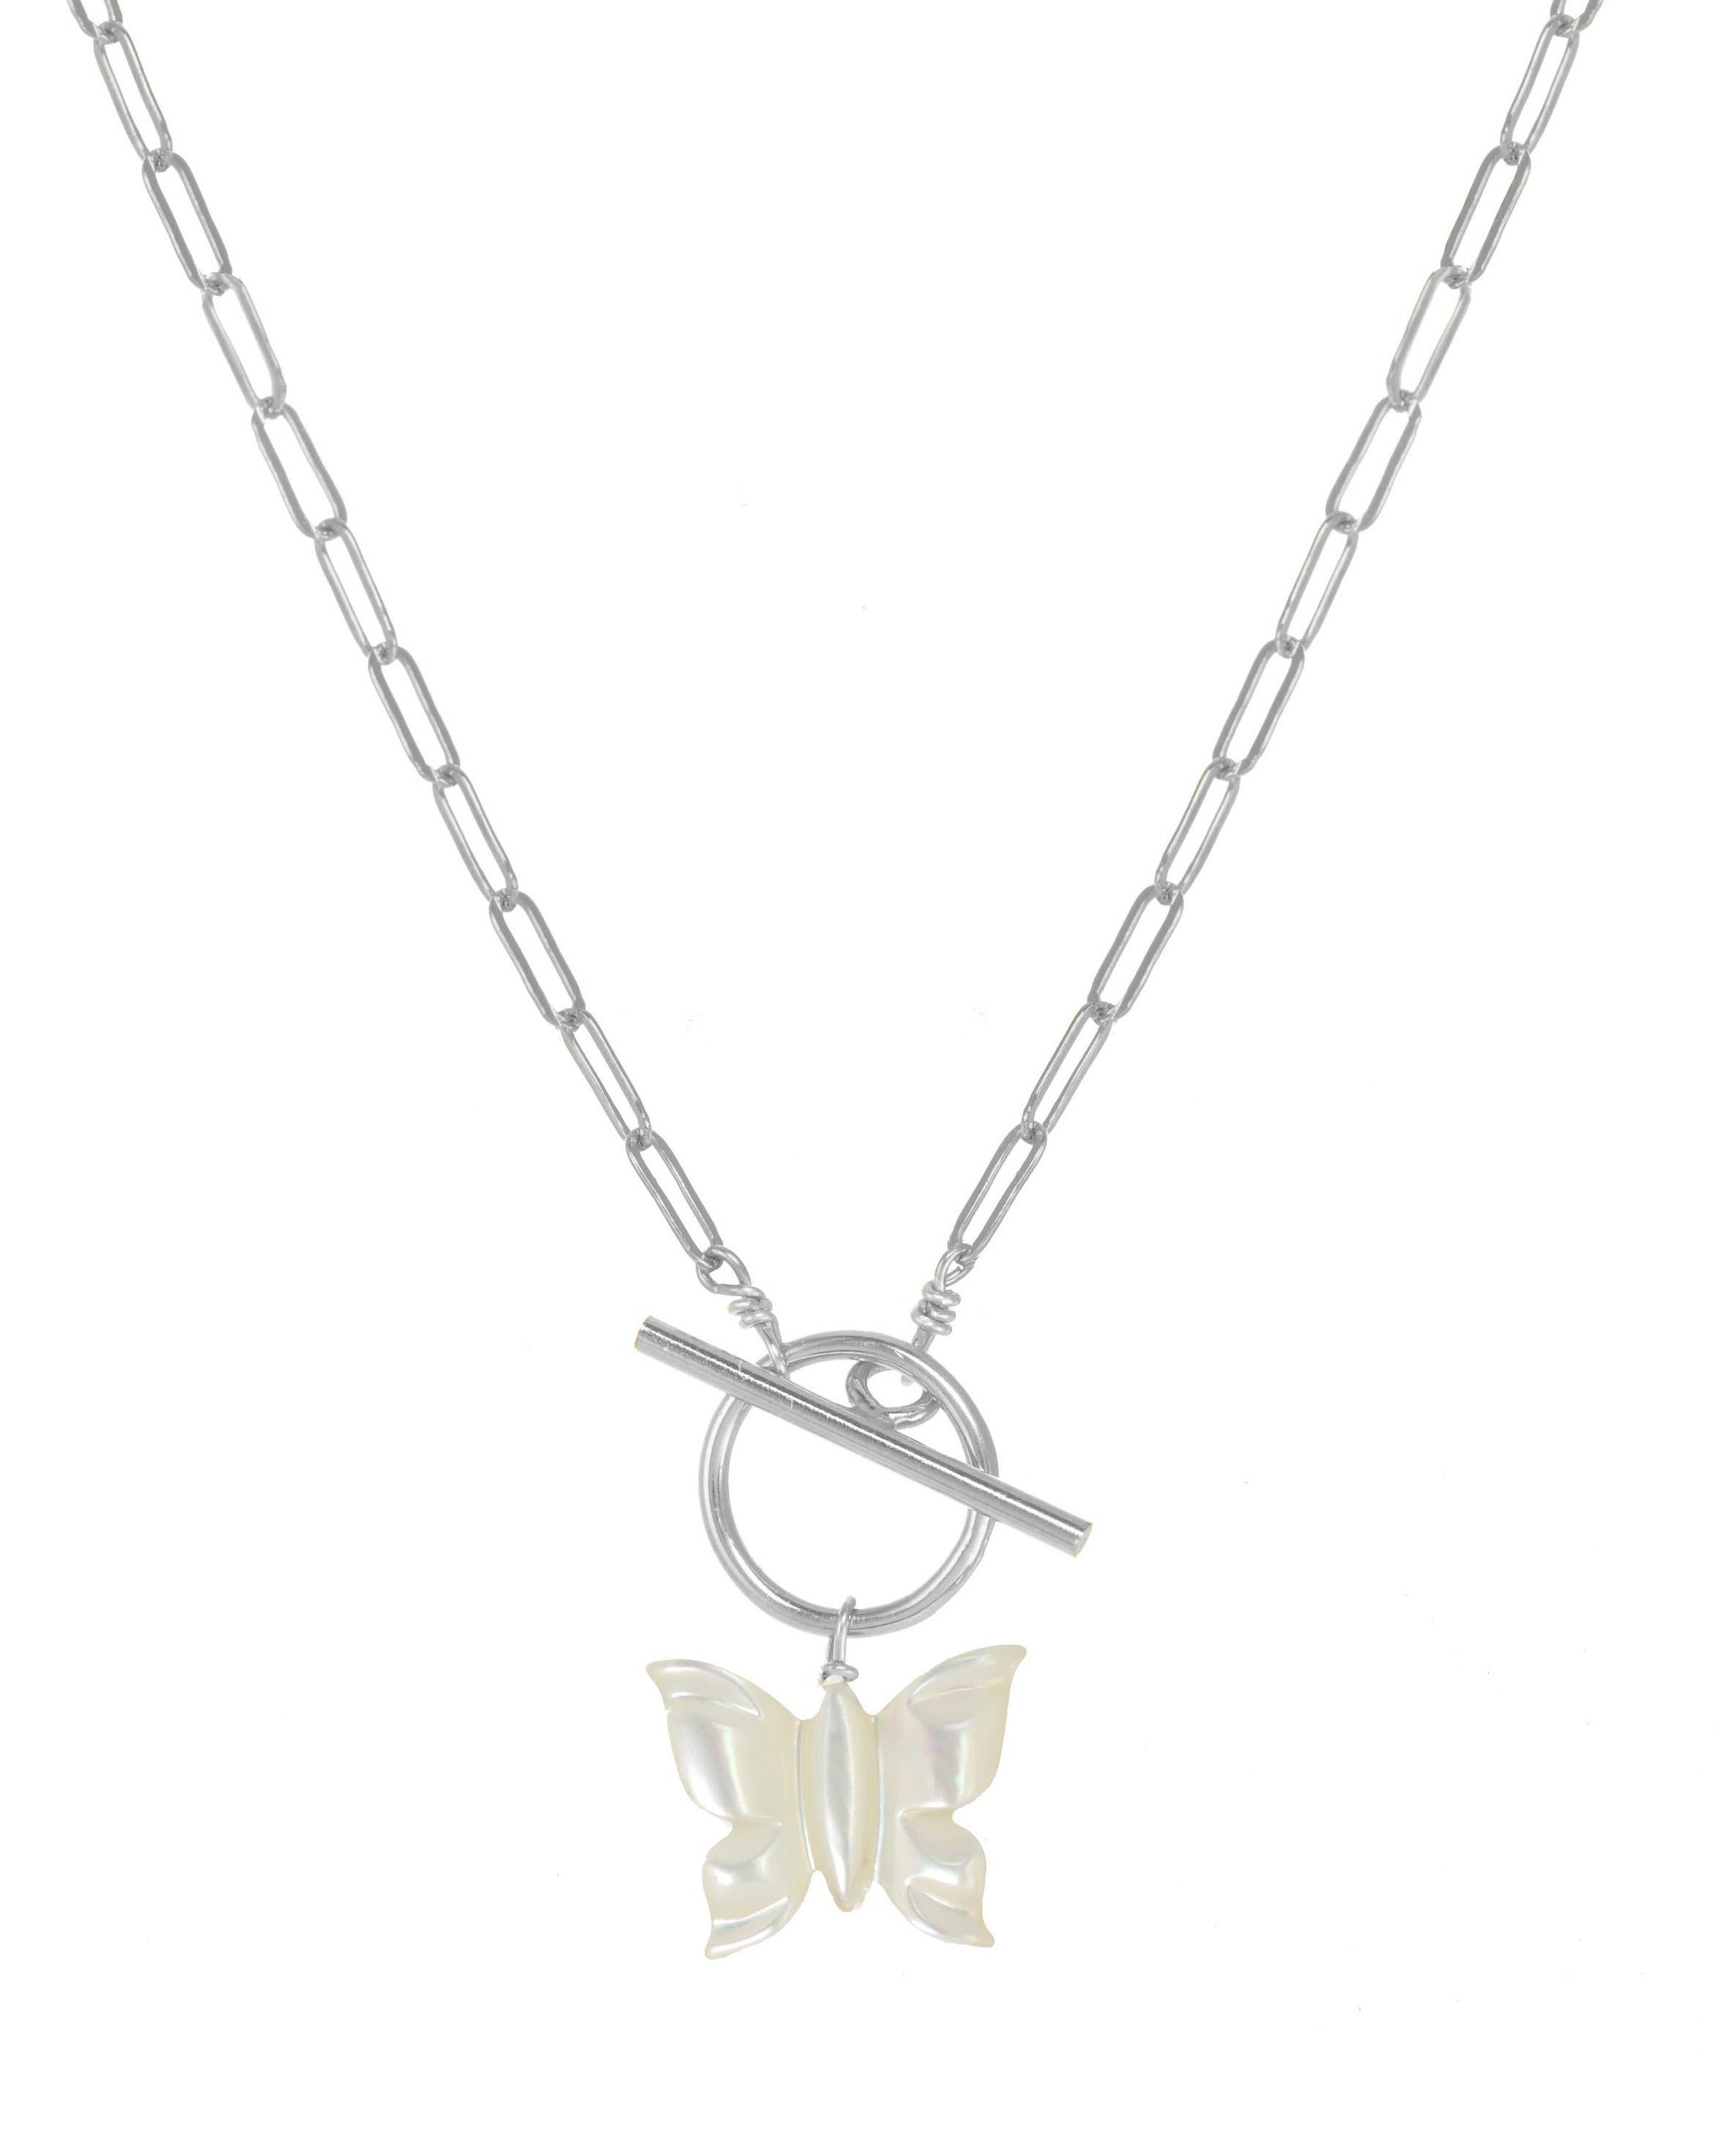 Arlette Necklace by KOZAKH. A 16 to 18 inch adjustable length necklace in Sterling Silver, featuring a hand-carved Mother of Pearl butterfly charm and a toggle closure at front of the necklace.